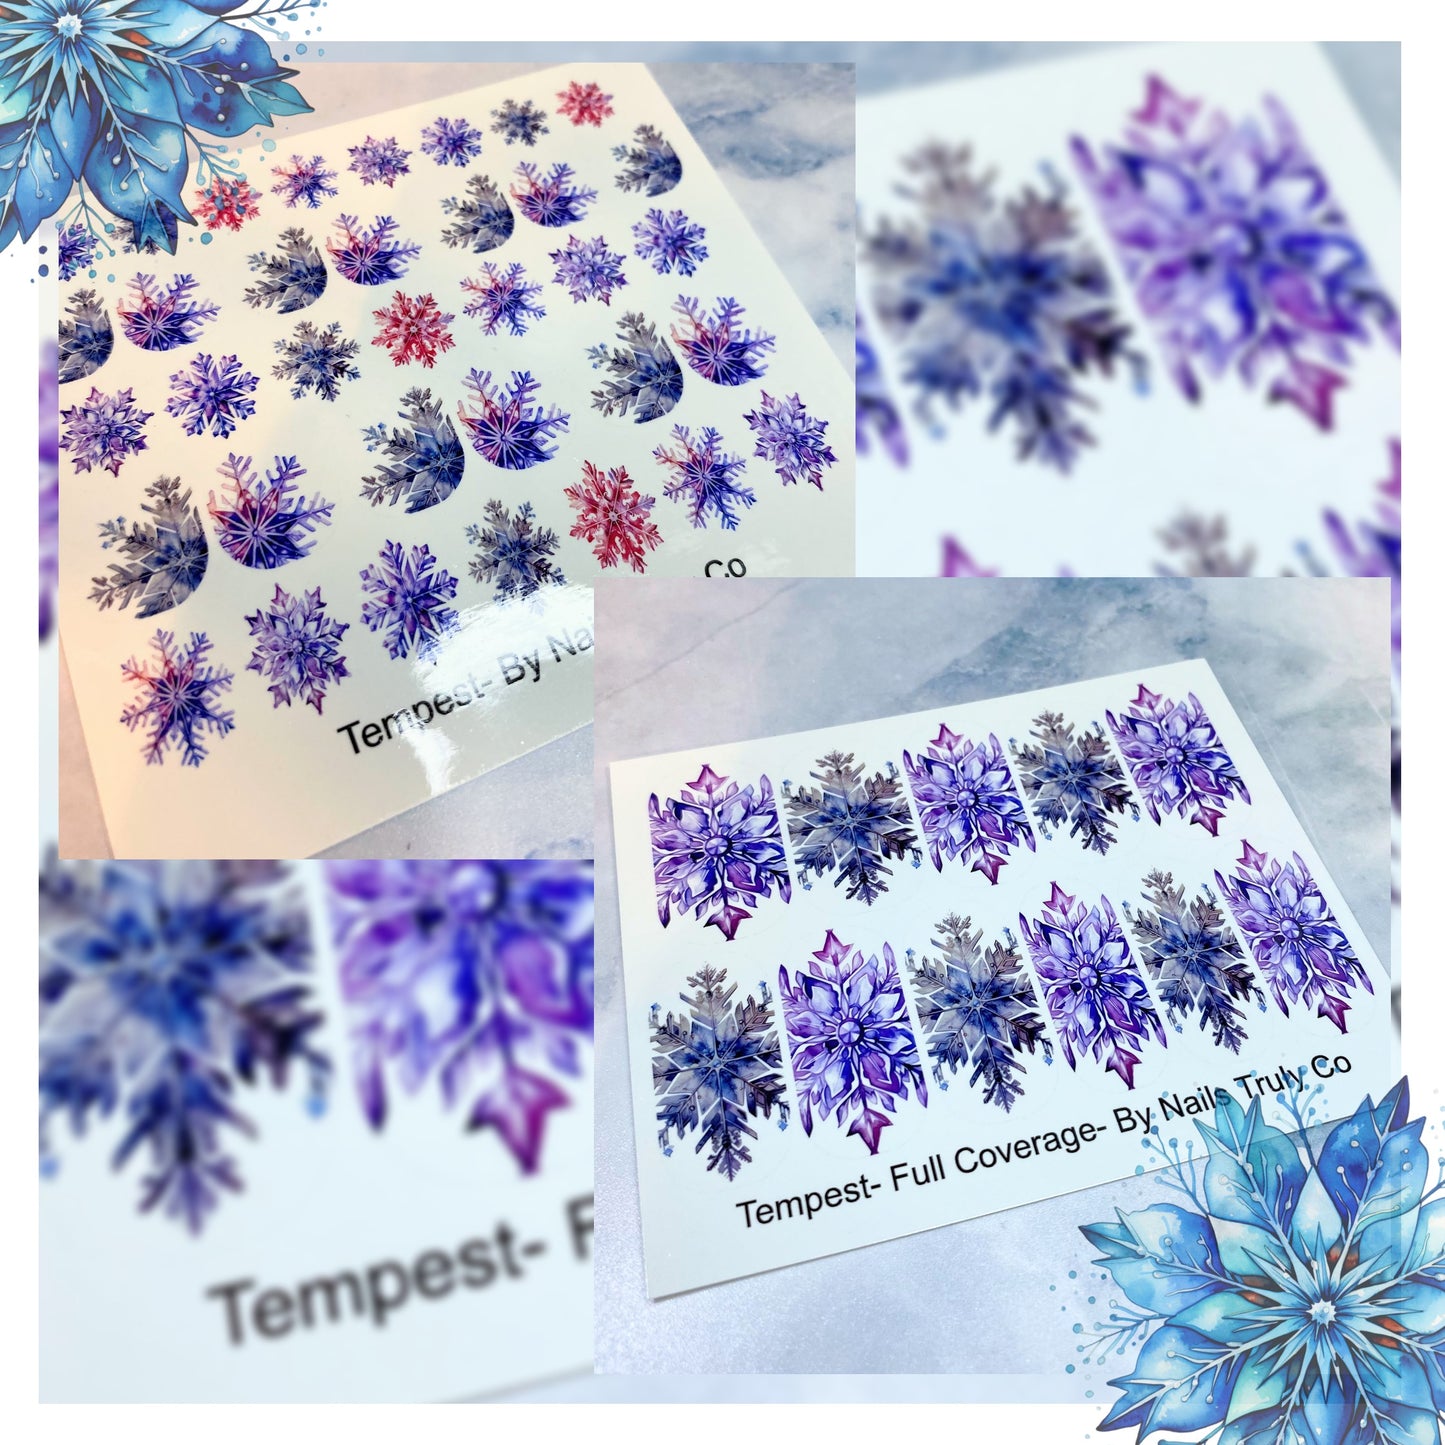 Tempest Snowflake Decals For Nails